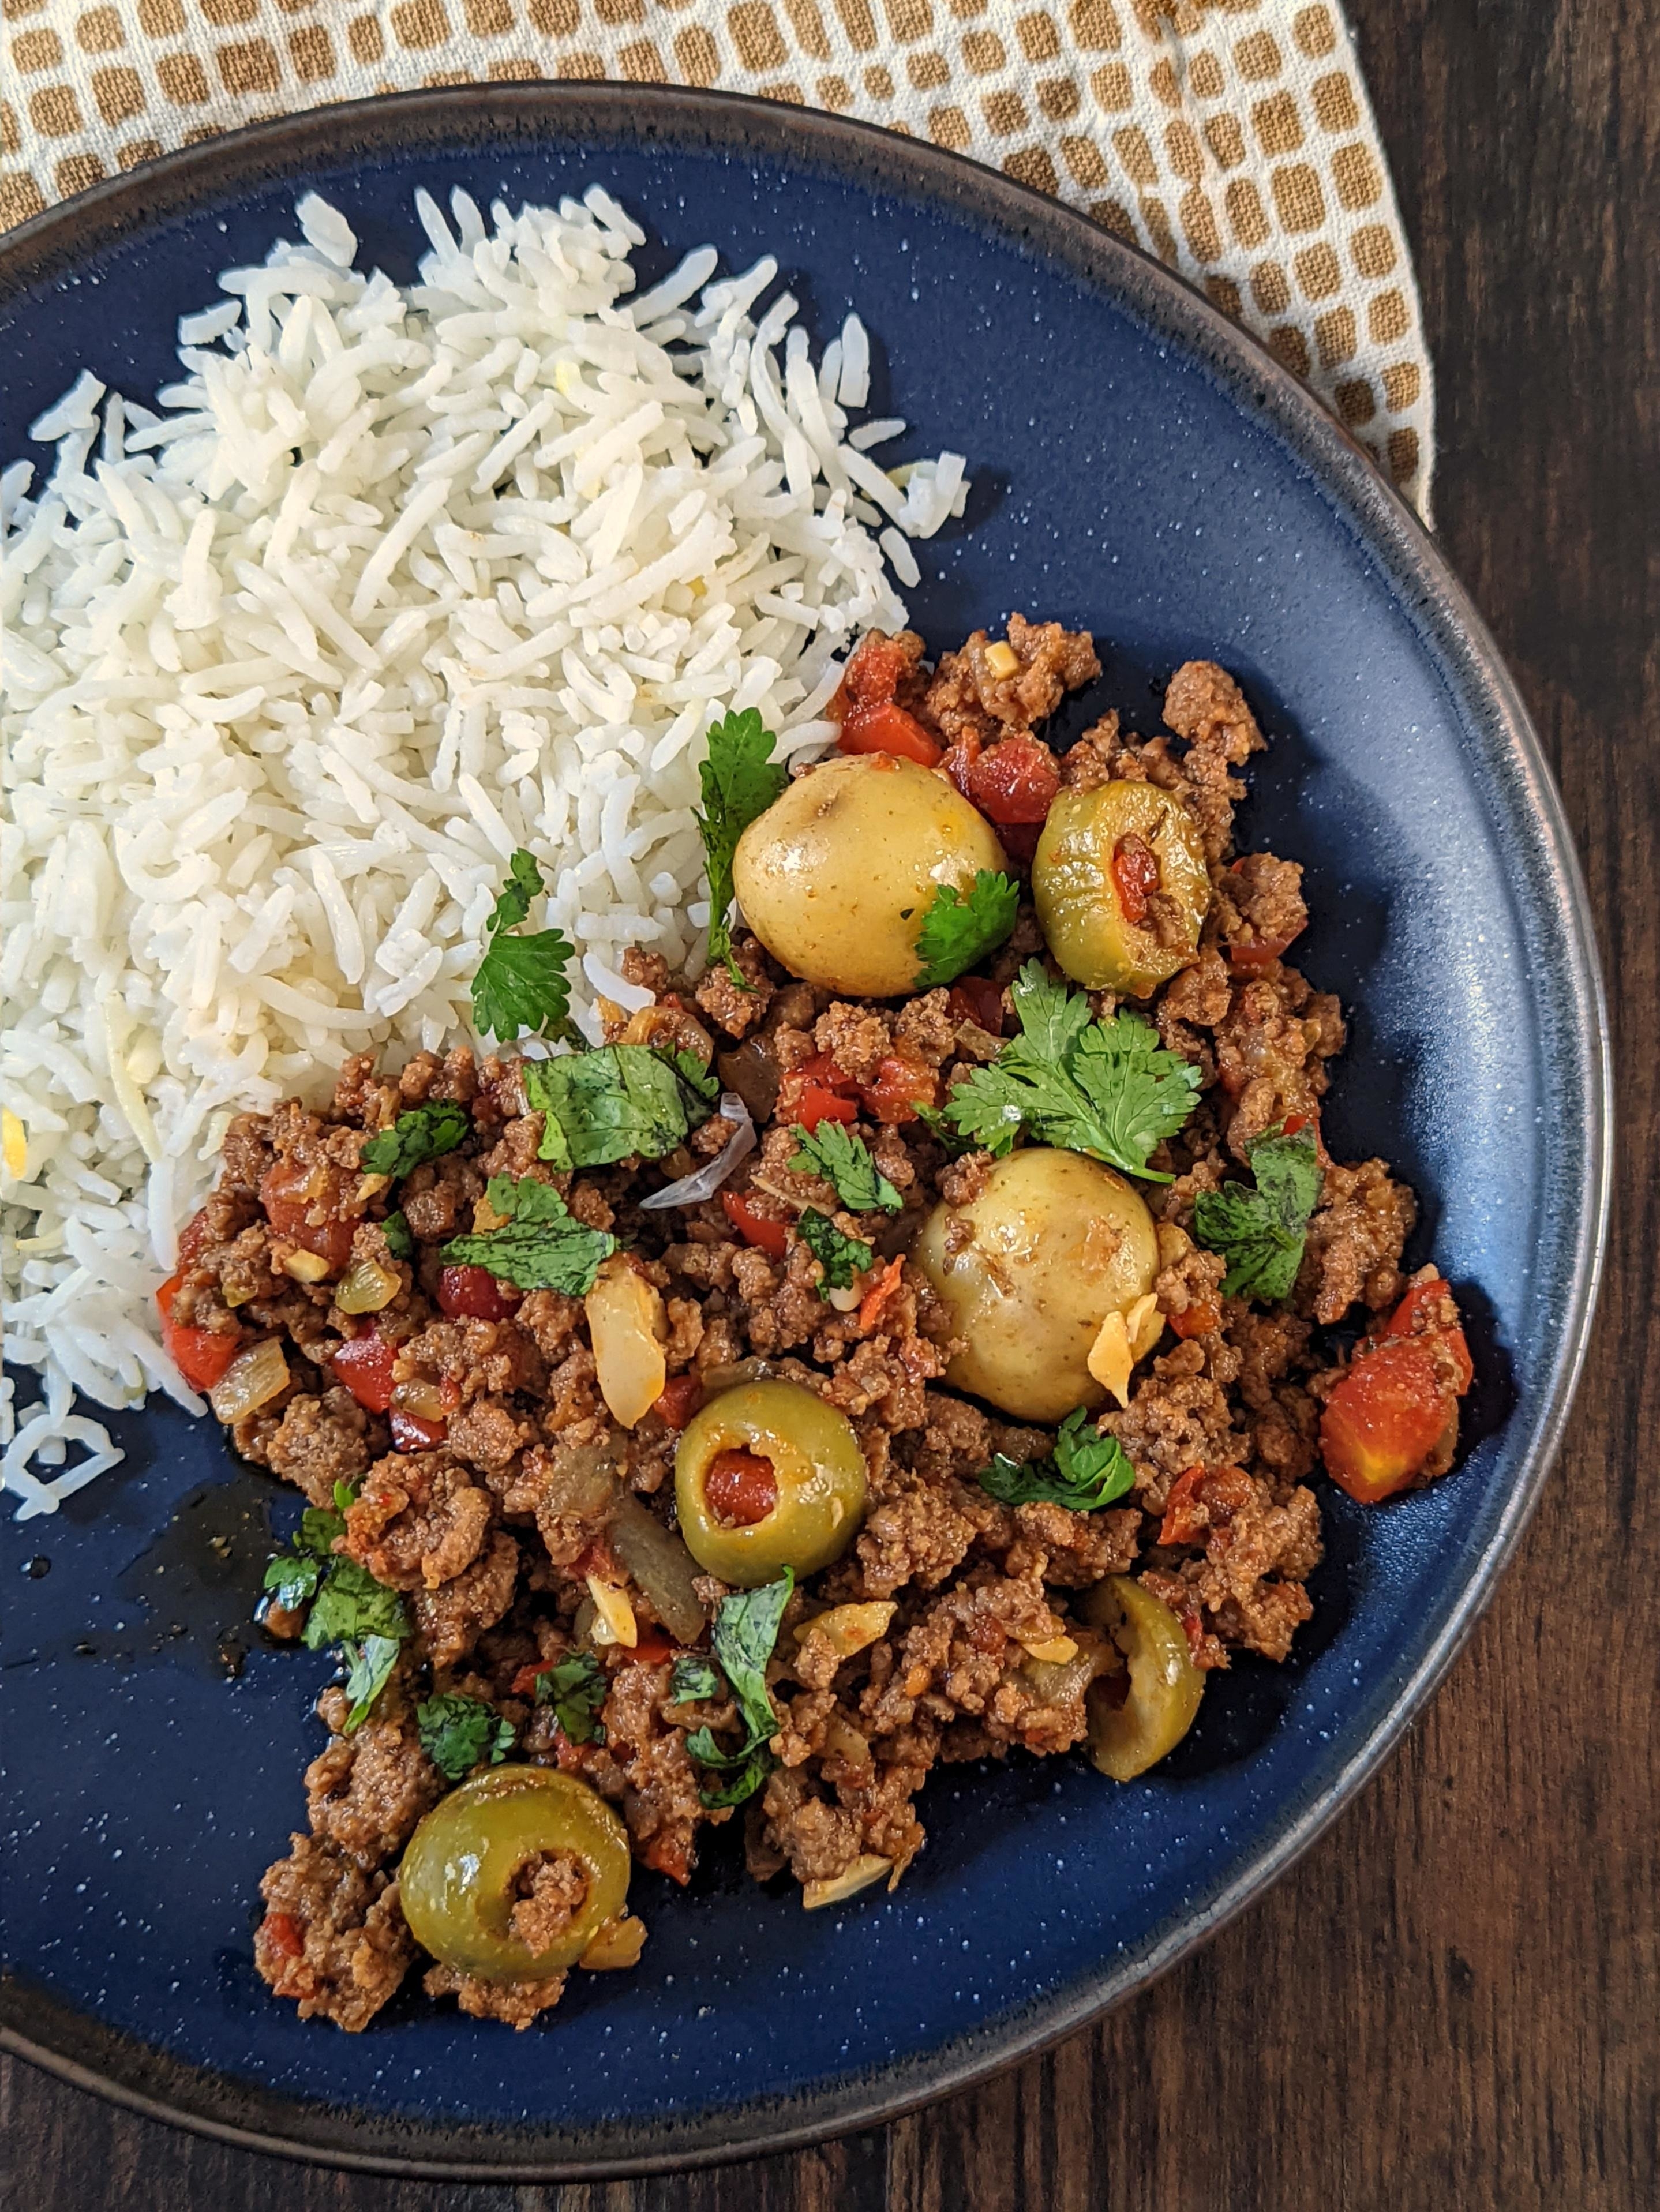 Cuban beef picadillo with olives, potatoes, and herbs served with a side of rice